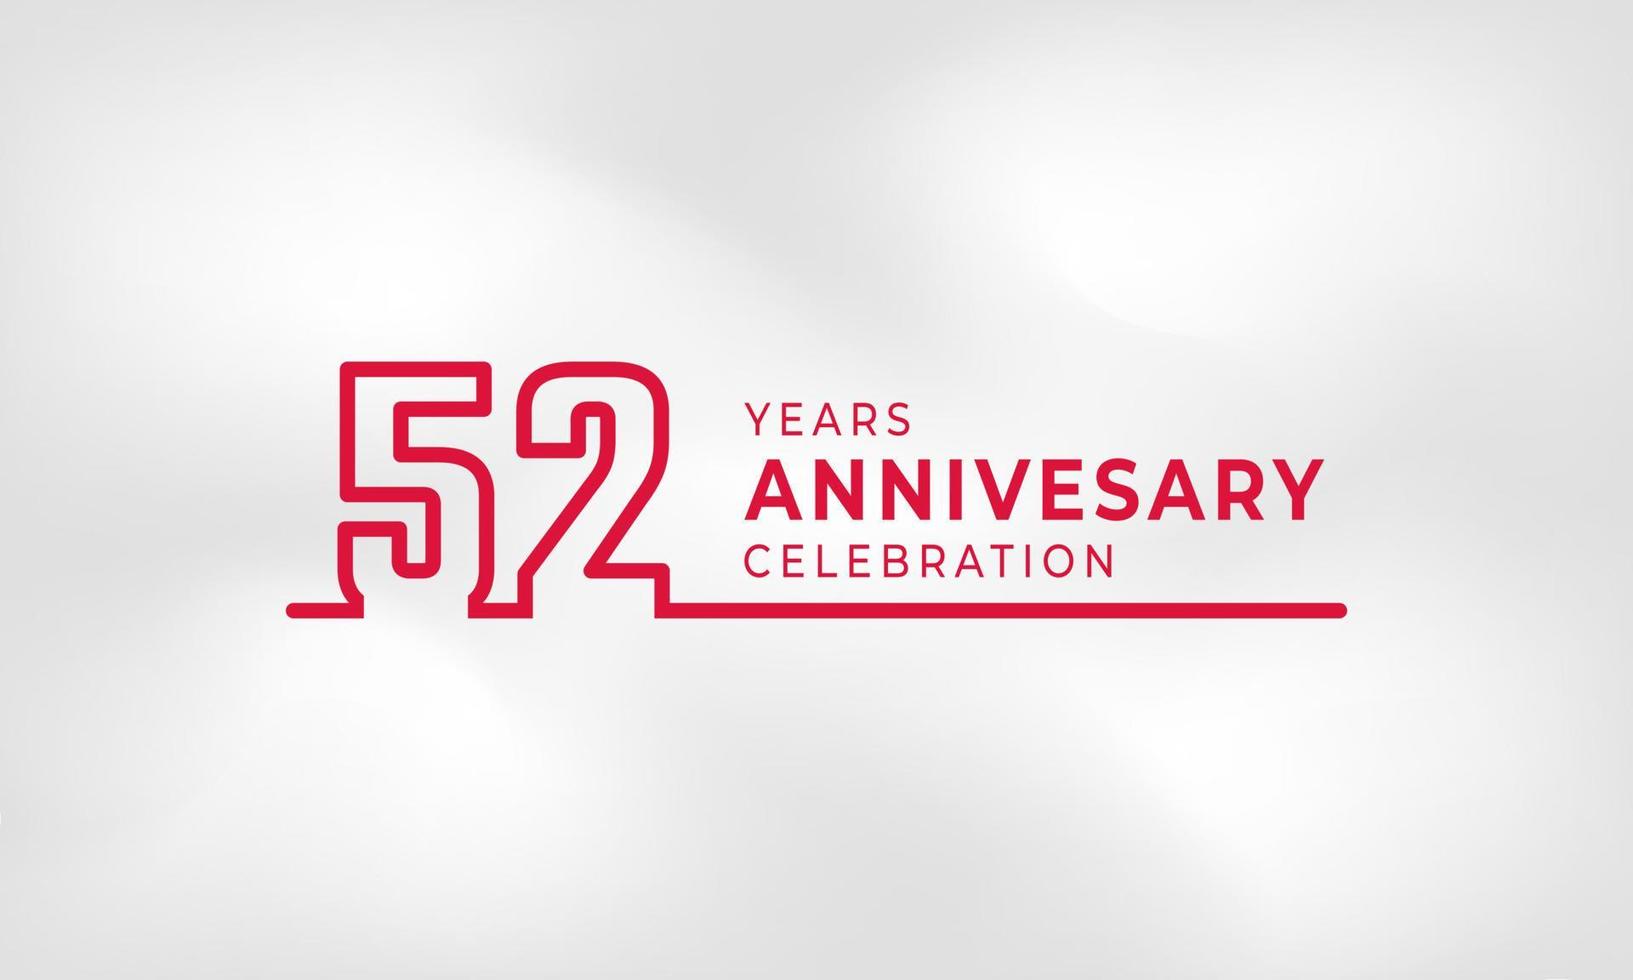 52 Year Anniversary Celebration Linked Logotype Outline Number Red Color for Celebration Event, Wedding, Greeting card, and Invitation Isolated on White Texture Background vector